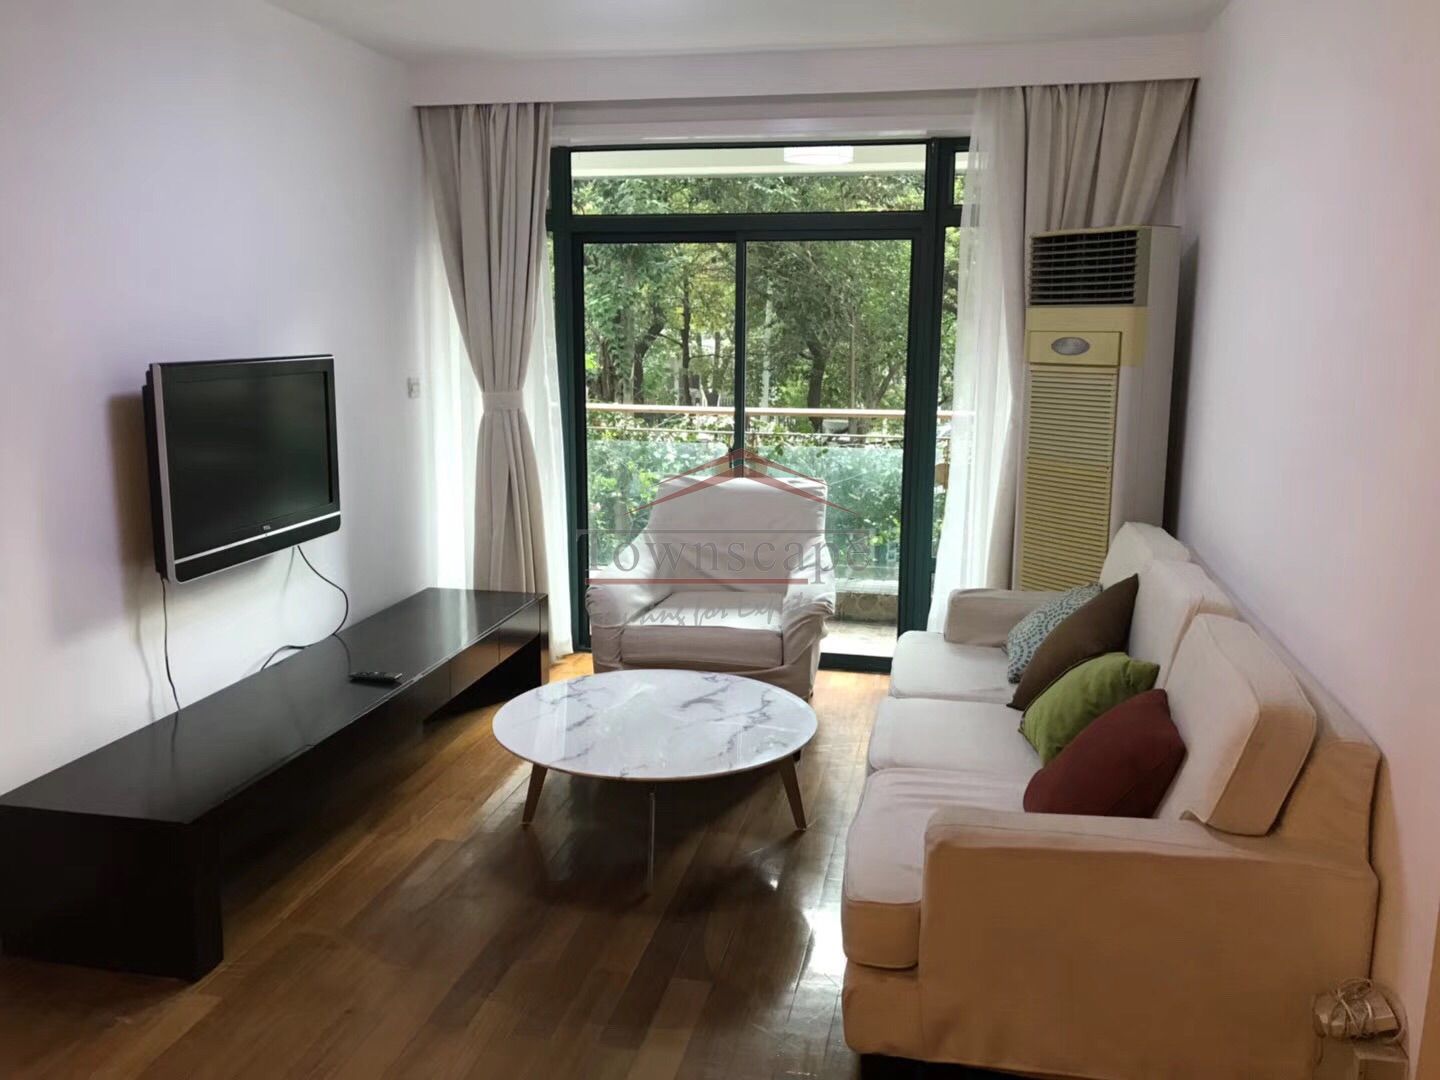  2BR Apartment, popular compound in Xujiahui